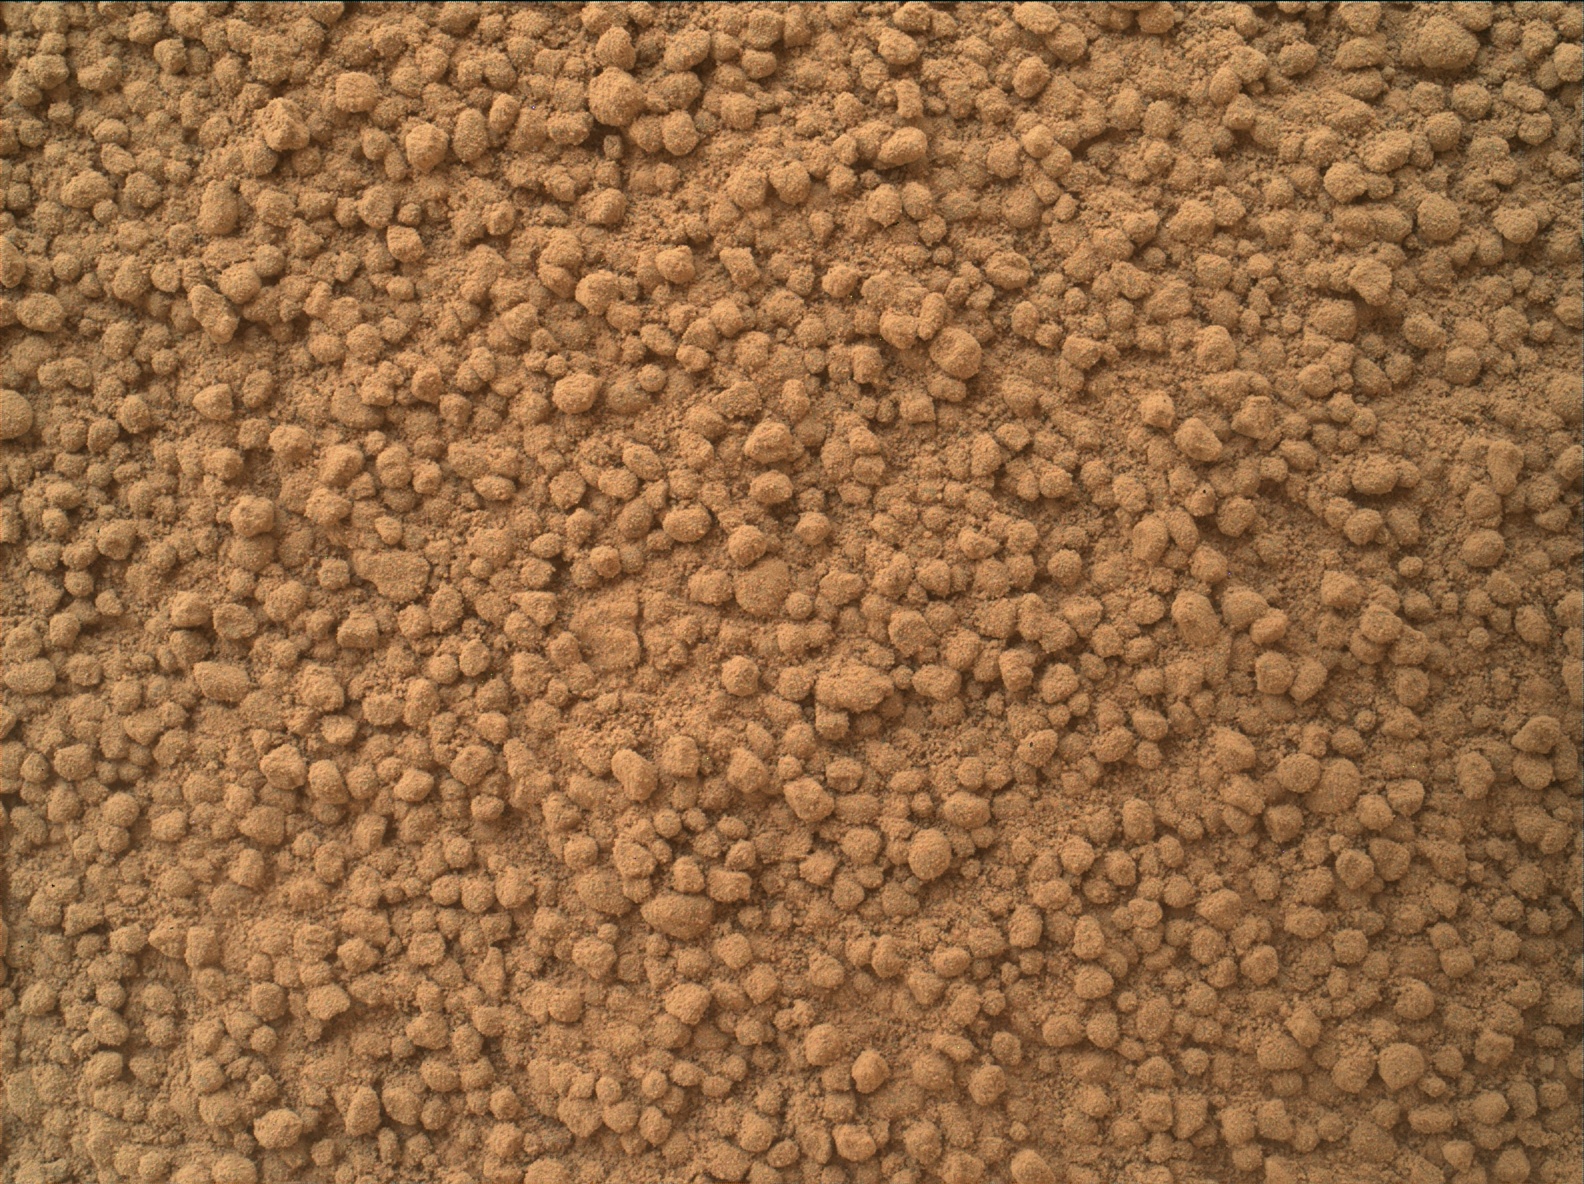 Nasa's Mars rover Curiosity acquired this image using its Mars Hand Lens Imager (MAHLI) on Sol 192